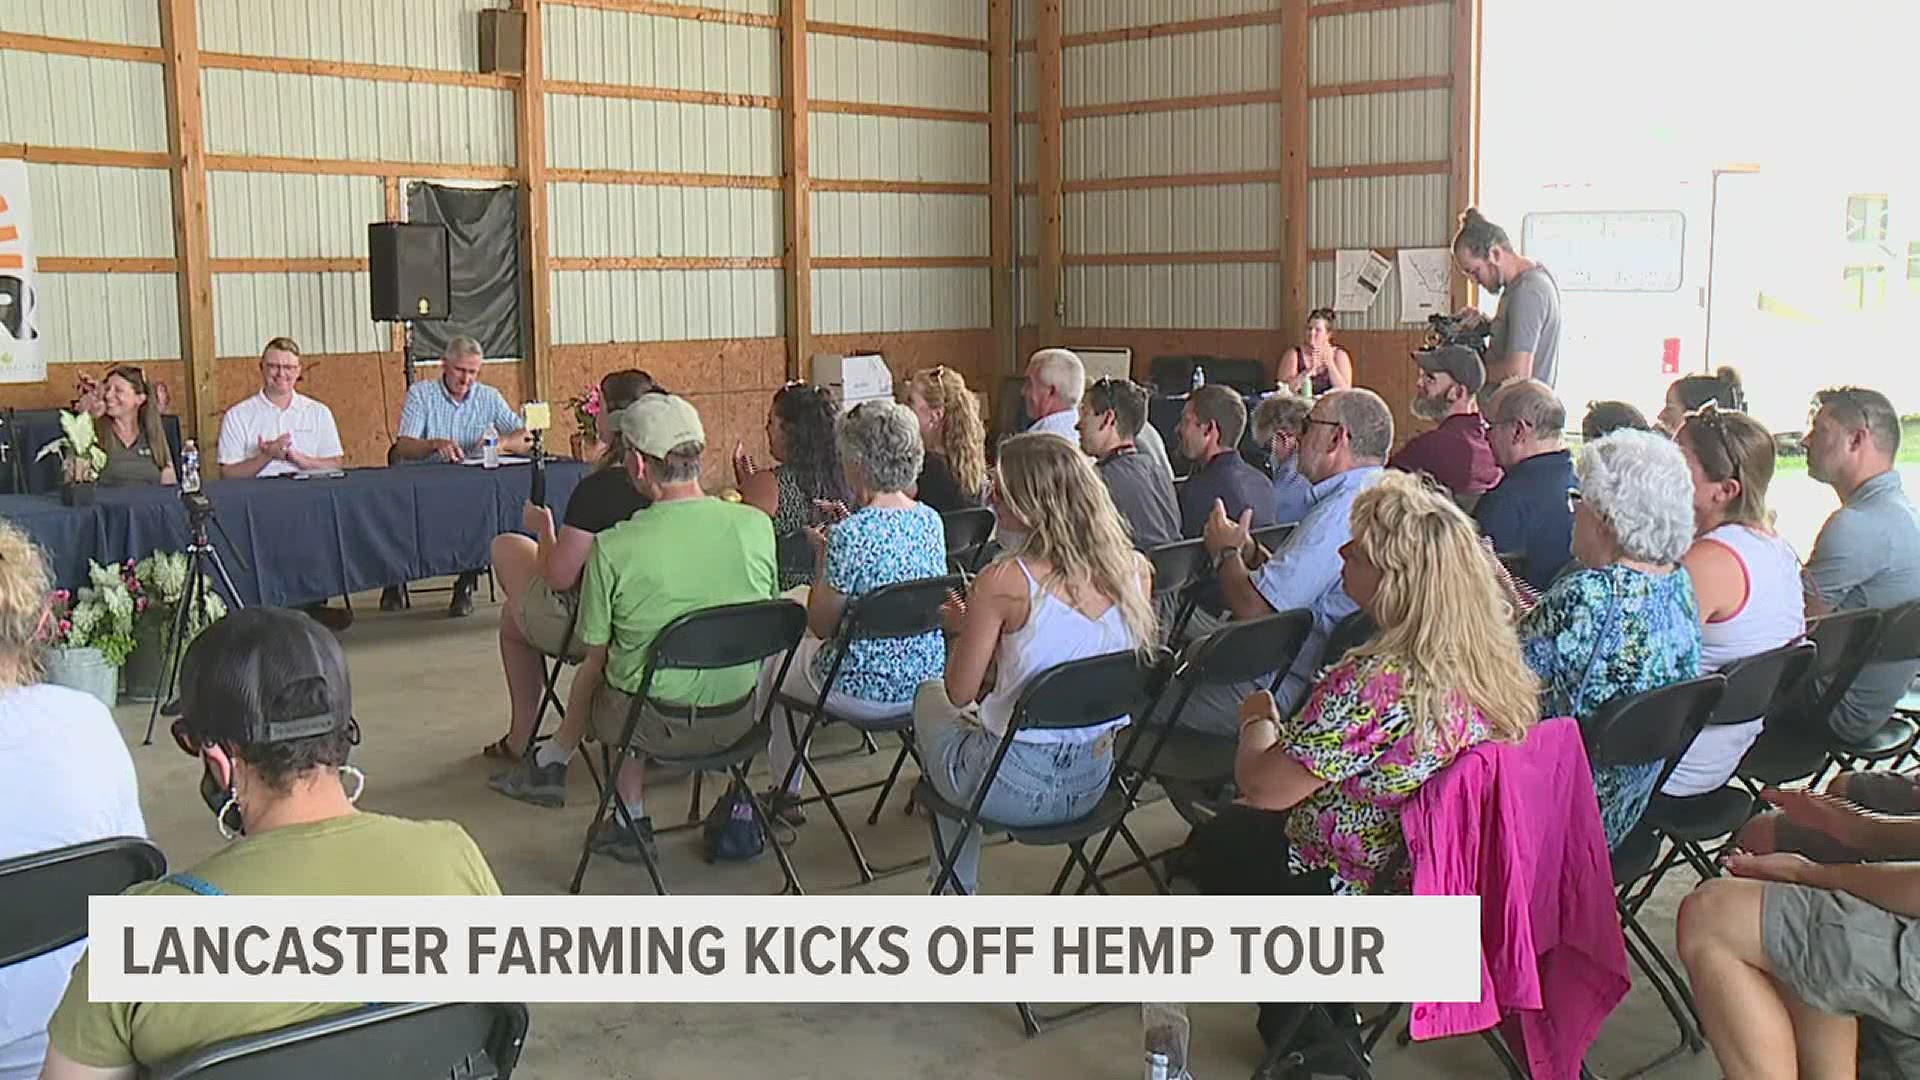 Hemp journalist & expert Eric Hurlock will travel in an RV across the country for six weeks.